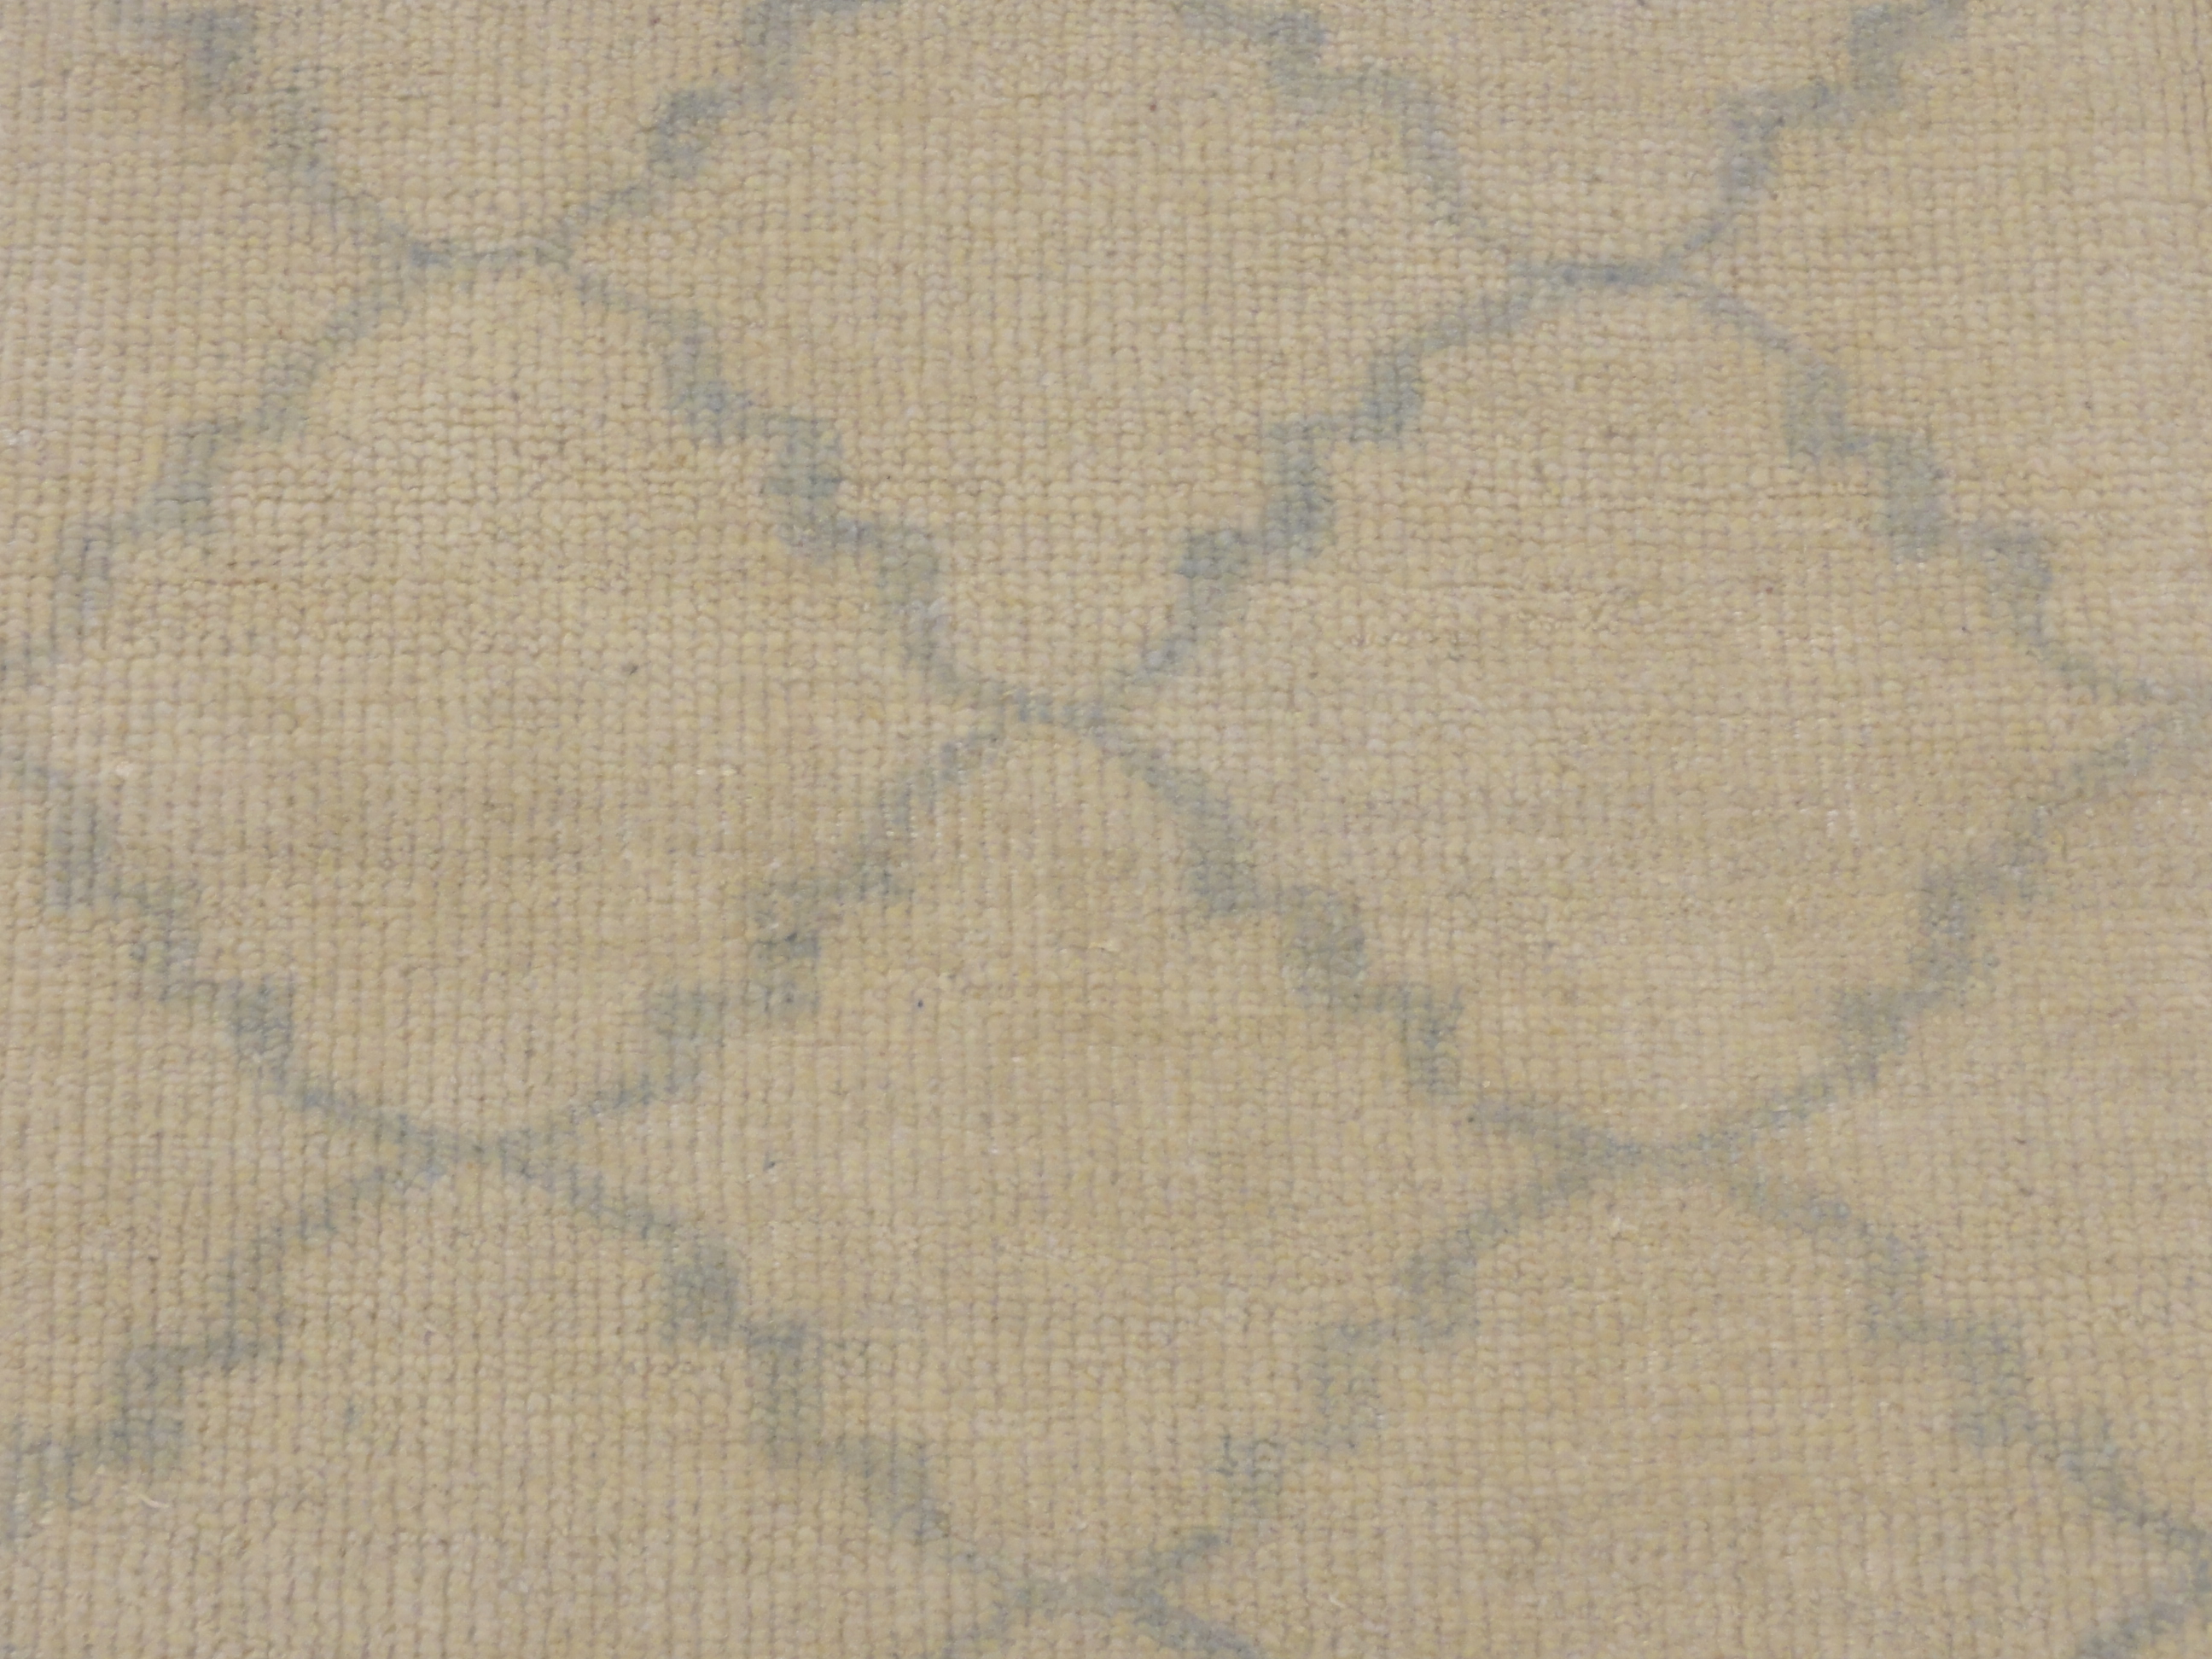 Fine Modern Blue and Beige Trellises Rug. A piece of woven authentic carpet art sold by Santa Barbara Design Center, Rugs and More.